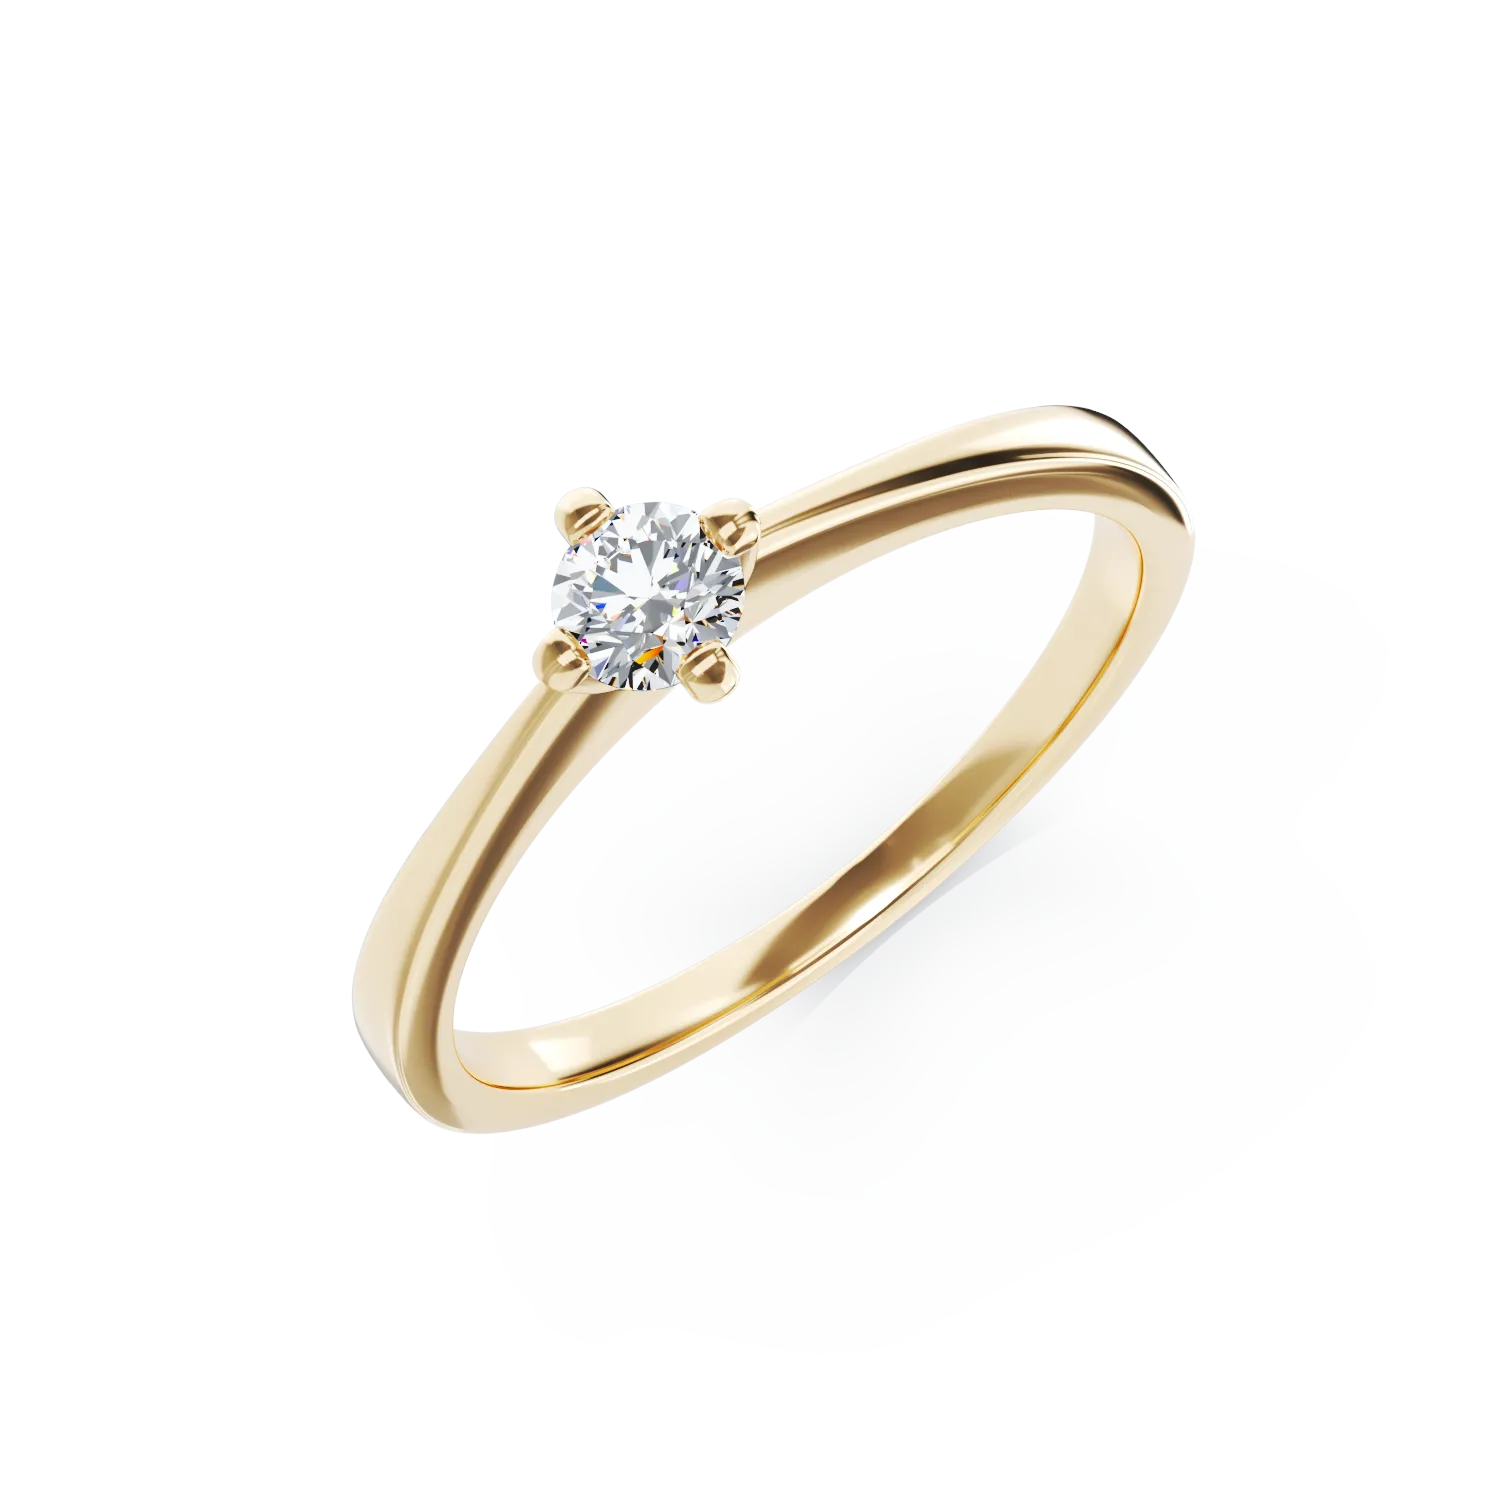 18K yellow gold engagement ring with a 0.25ct solitaire diamond